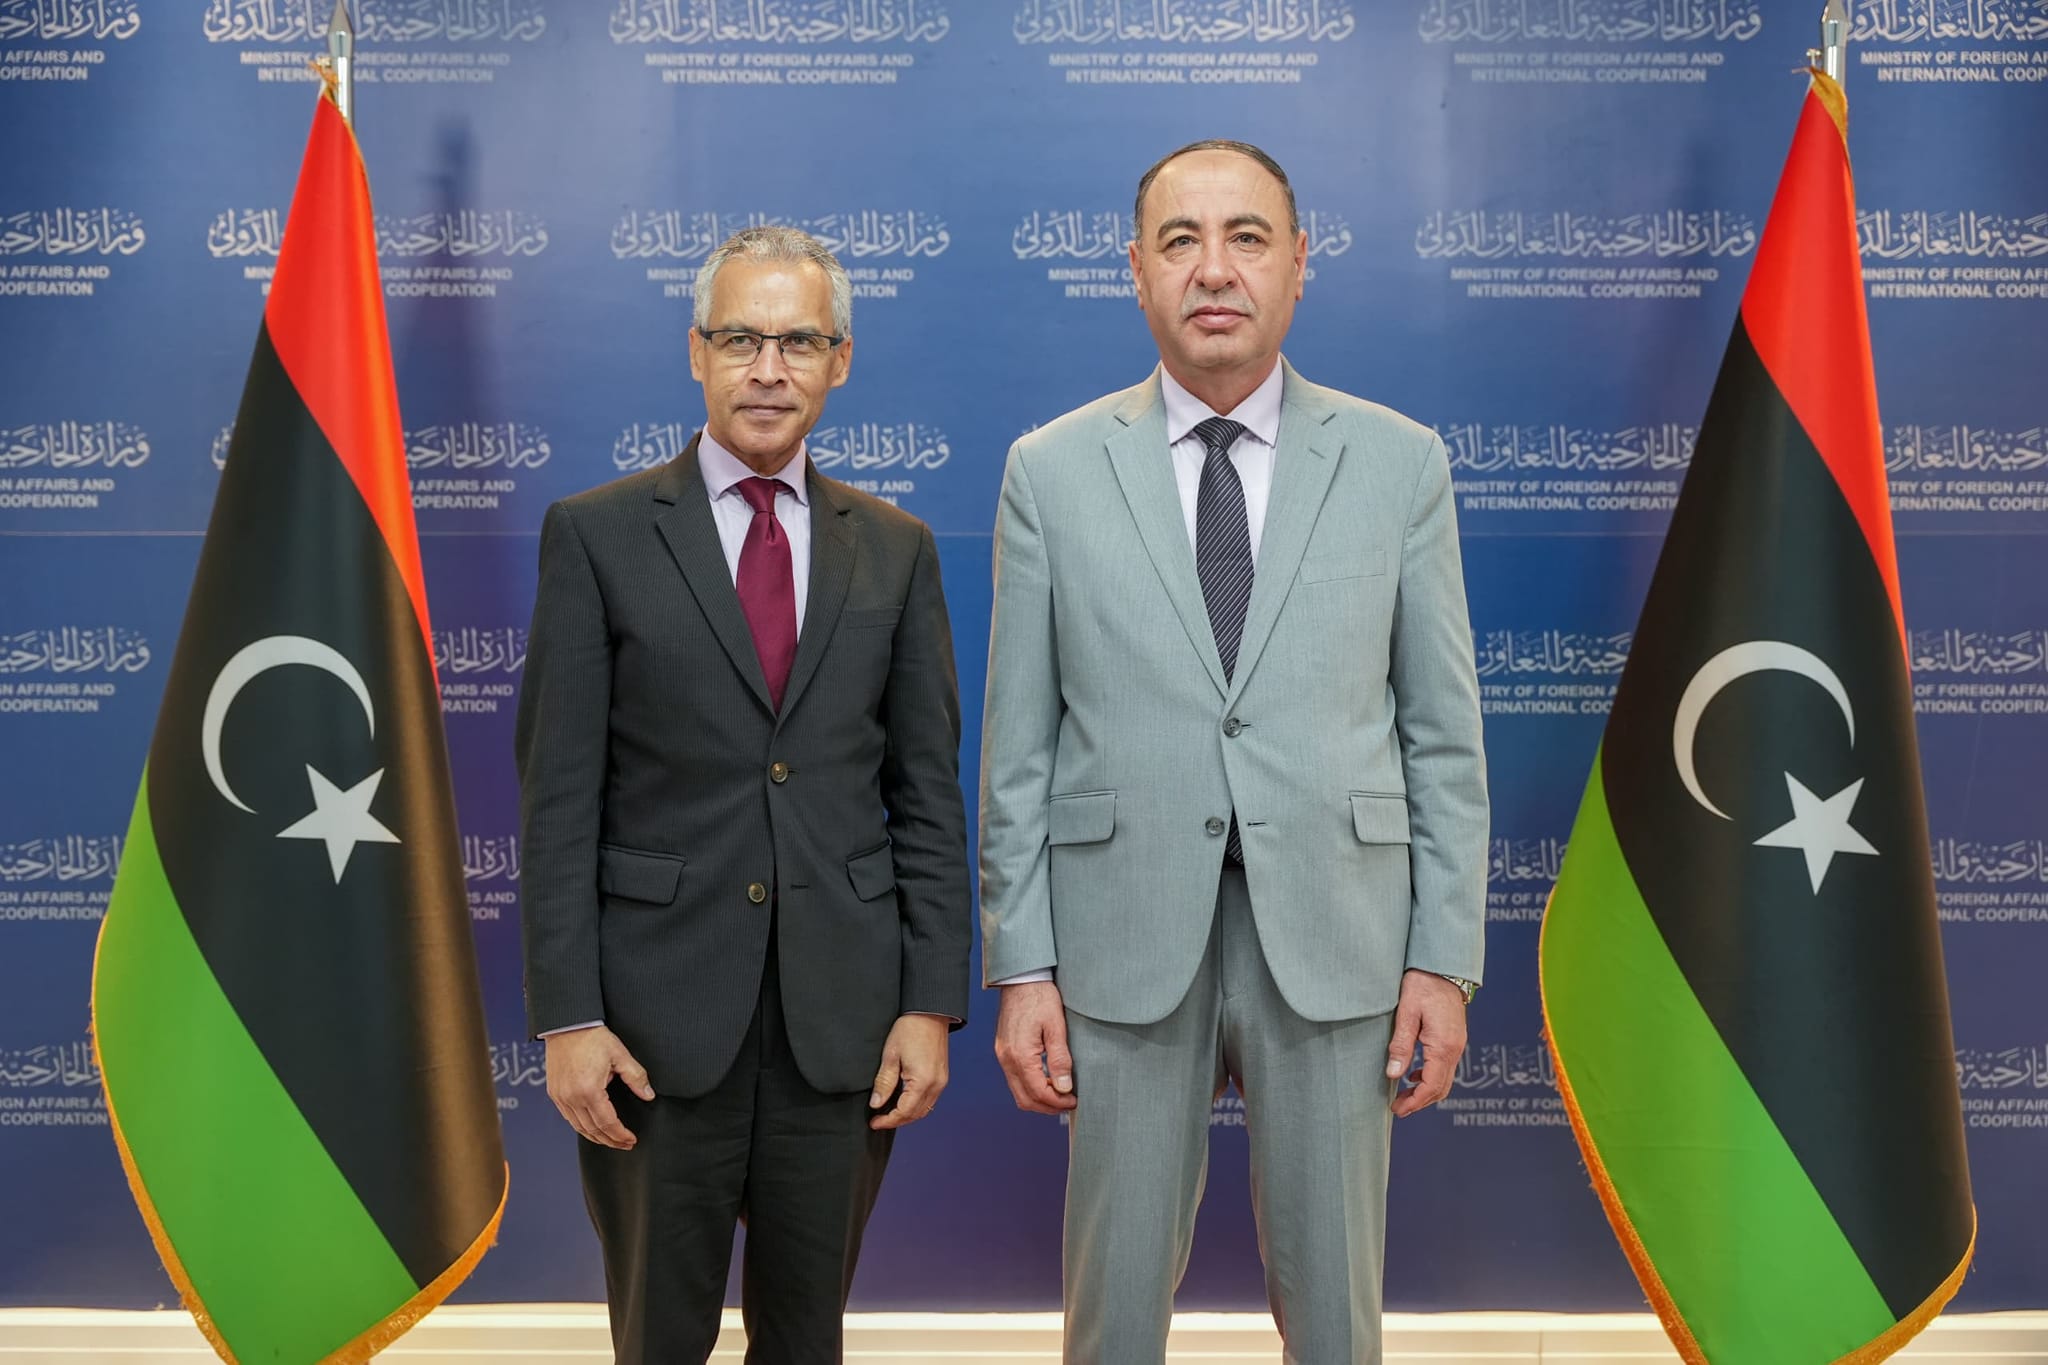 Al-Baour and the French Ambassador to Libya discuss the latest political developments and topics of common interest.